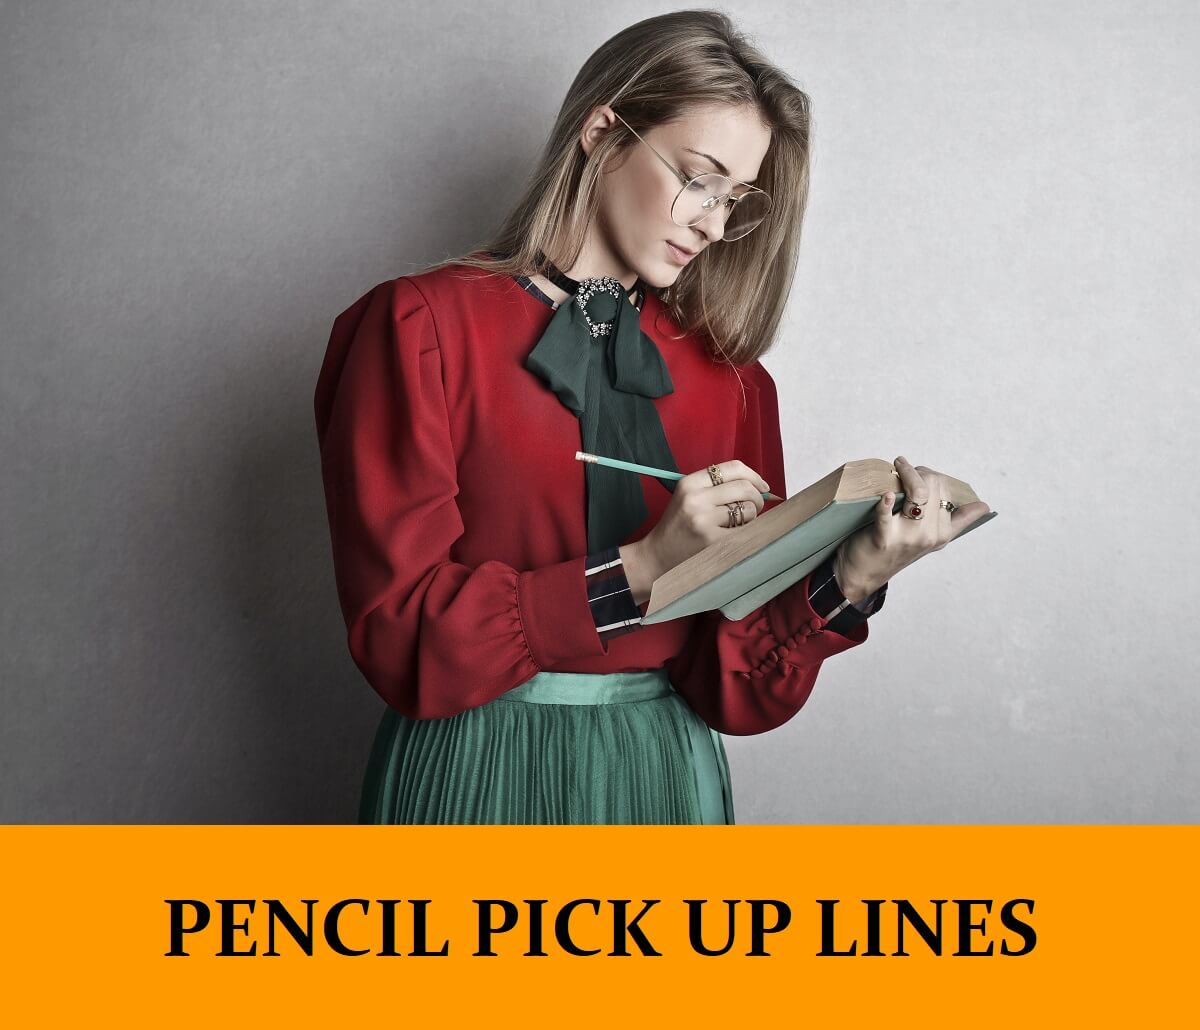 Pick Up Lines About Pencils